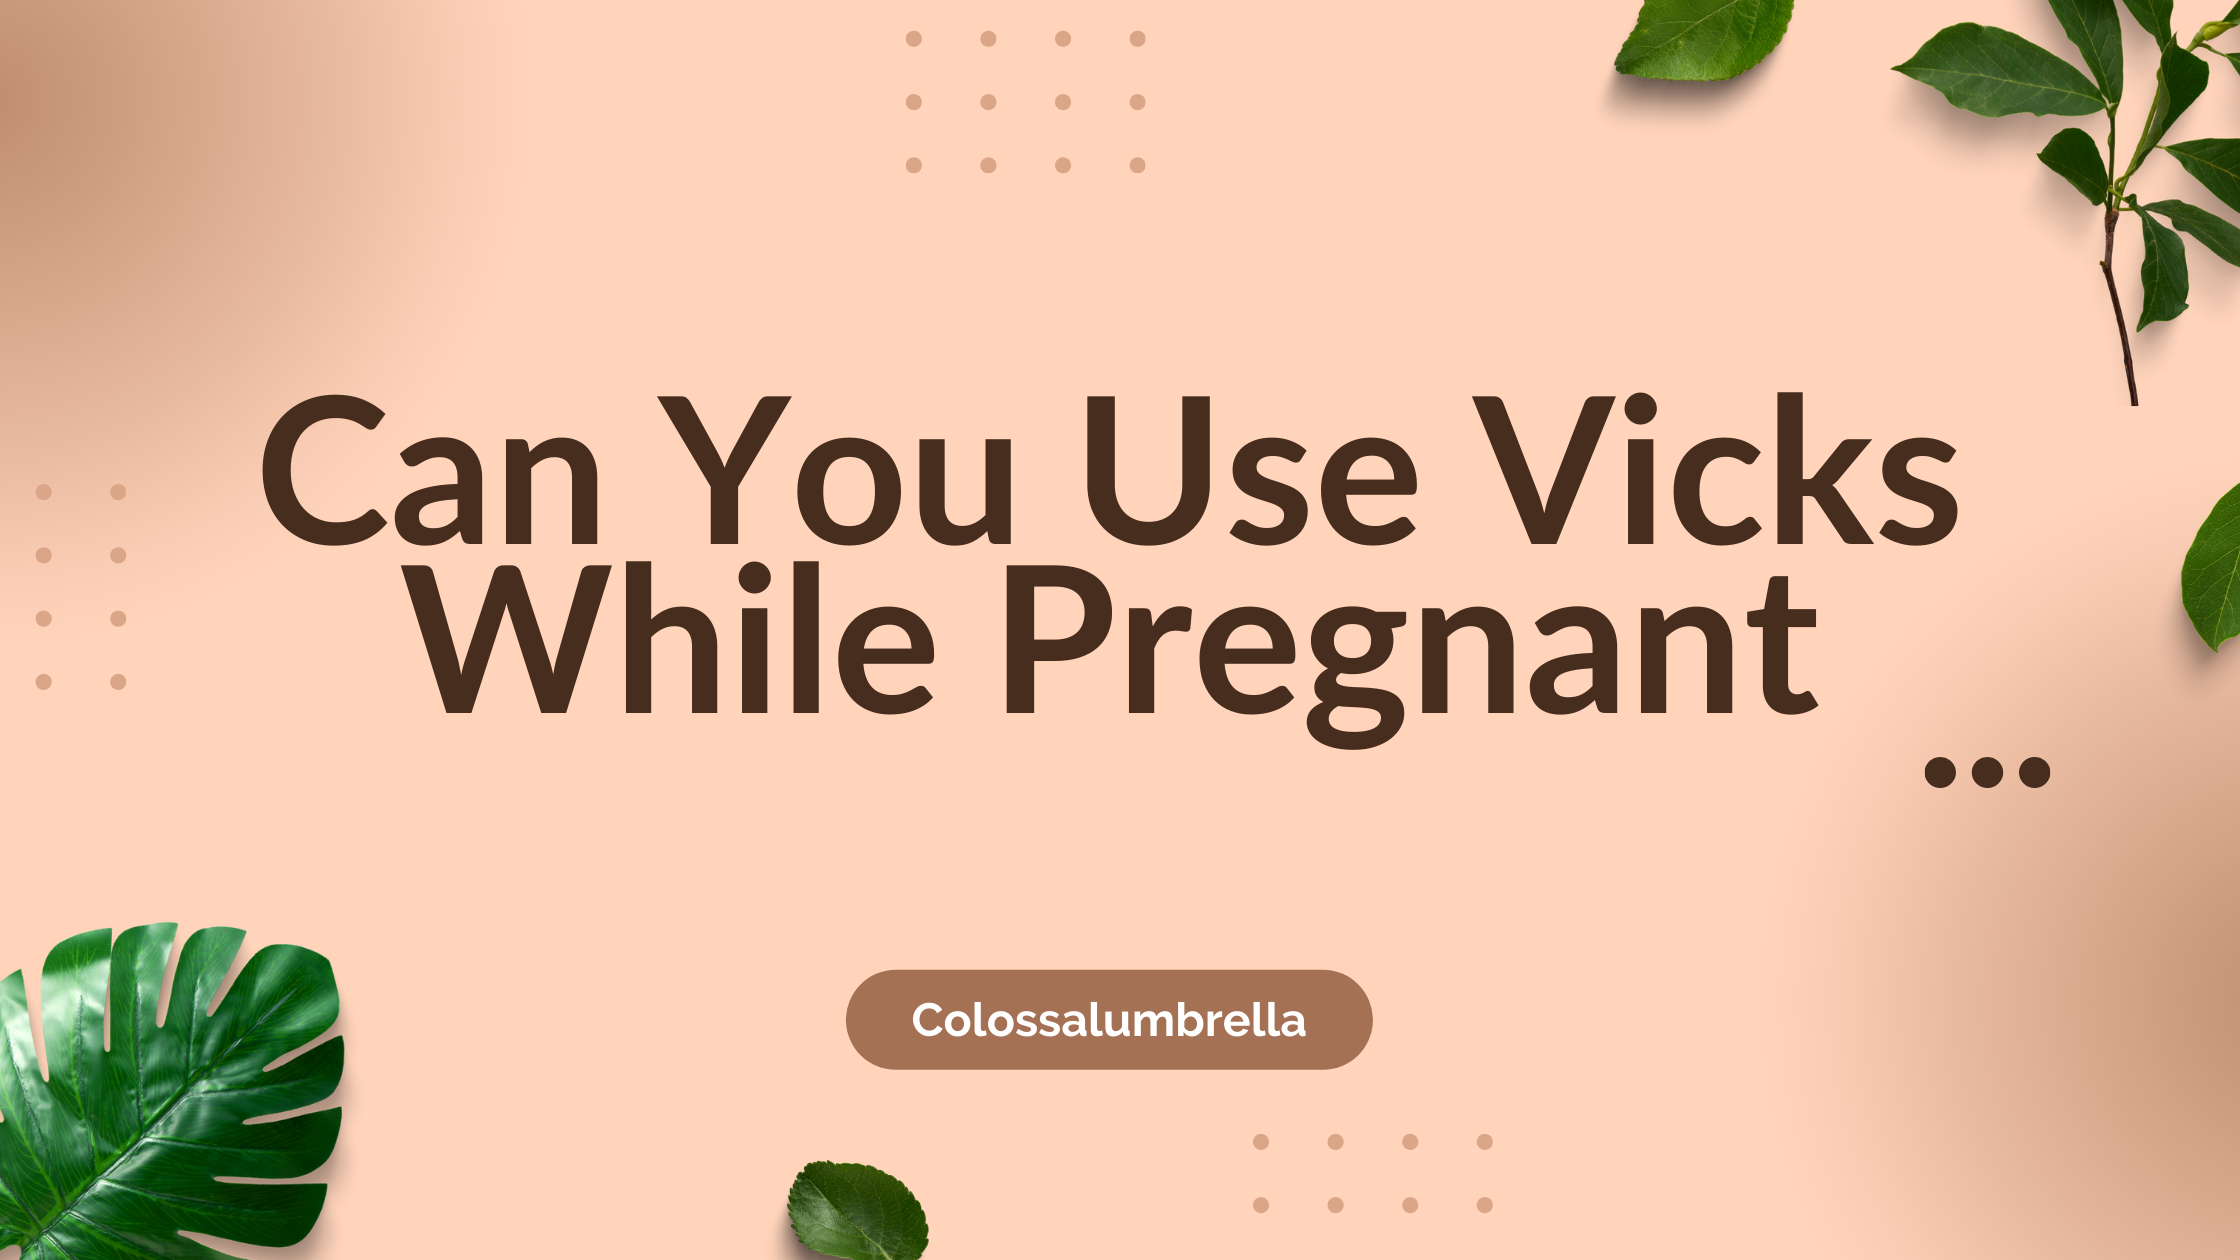 Can you use Vicks while pregnant? Is it completely safe?